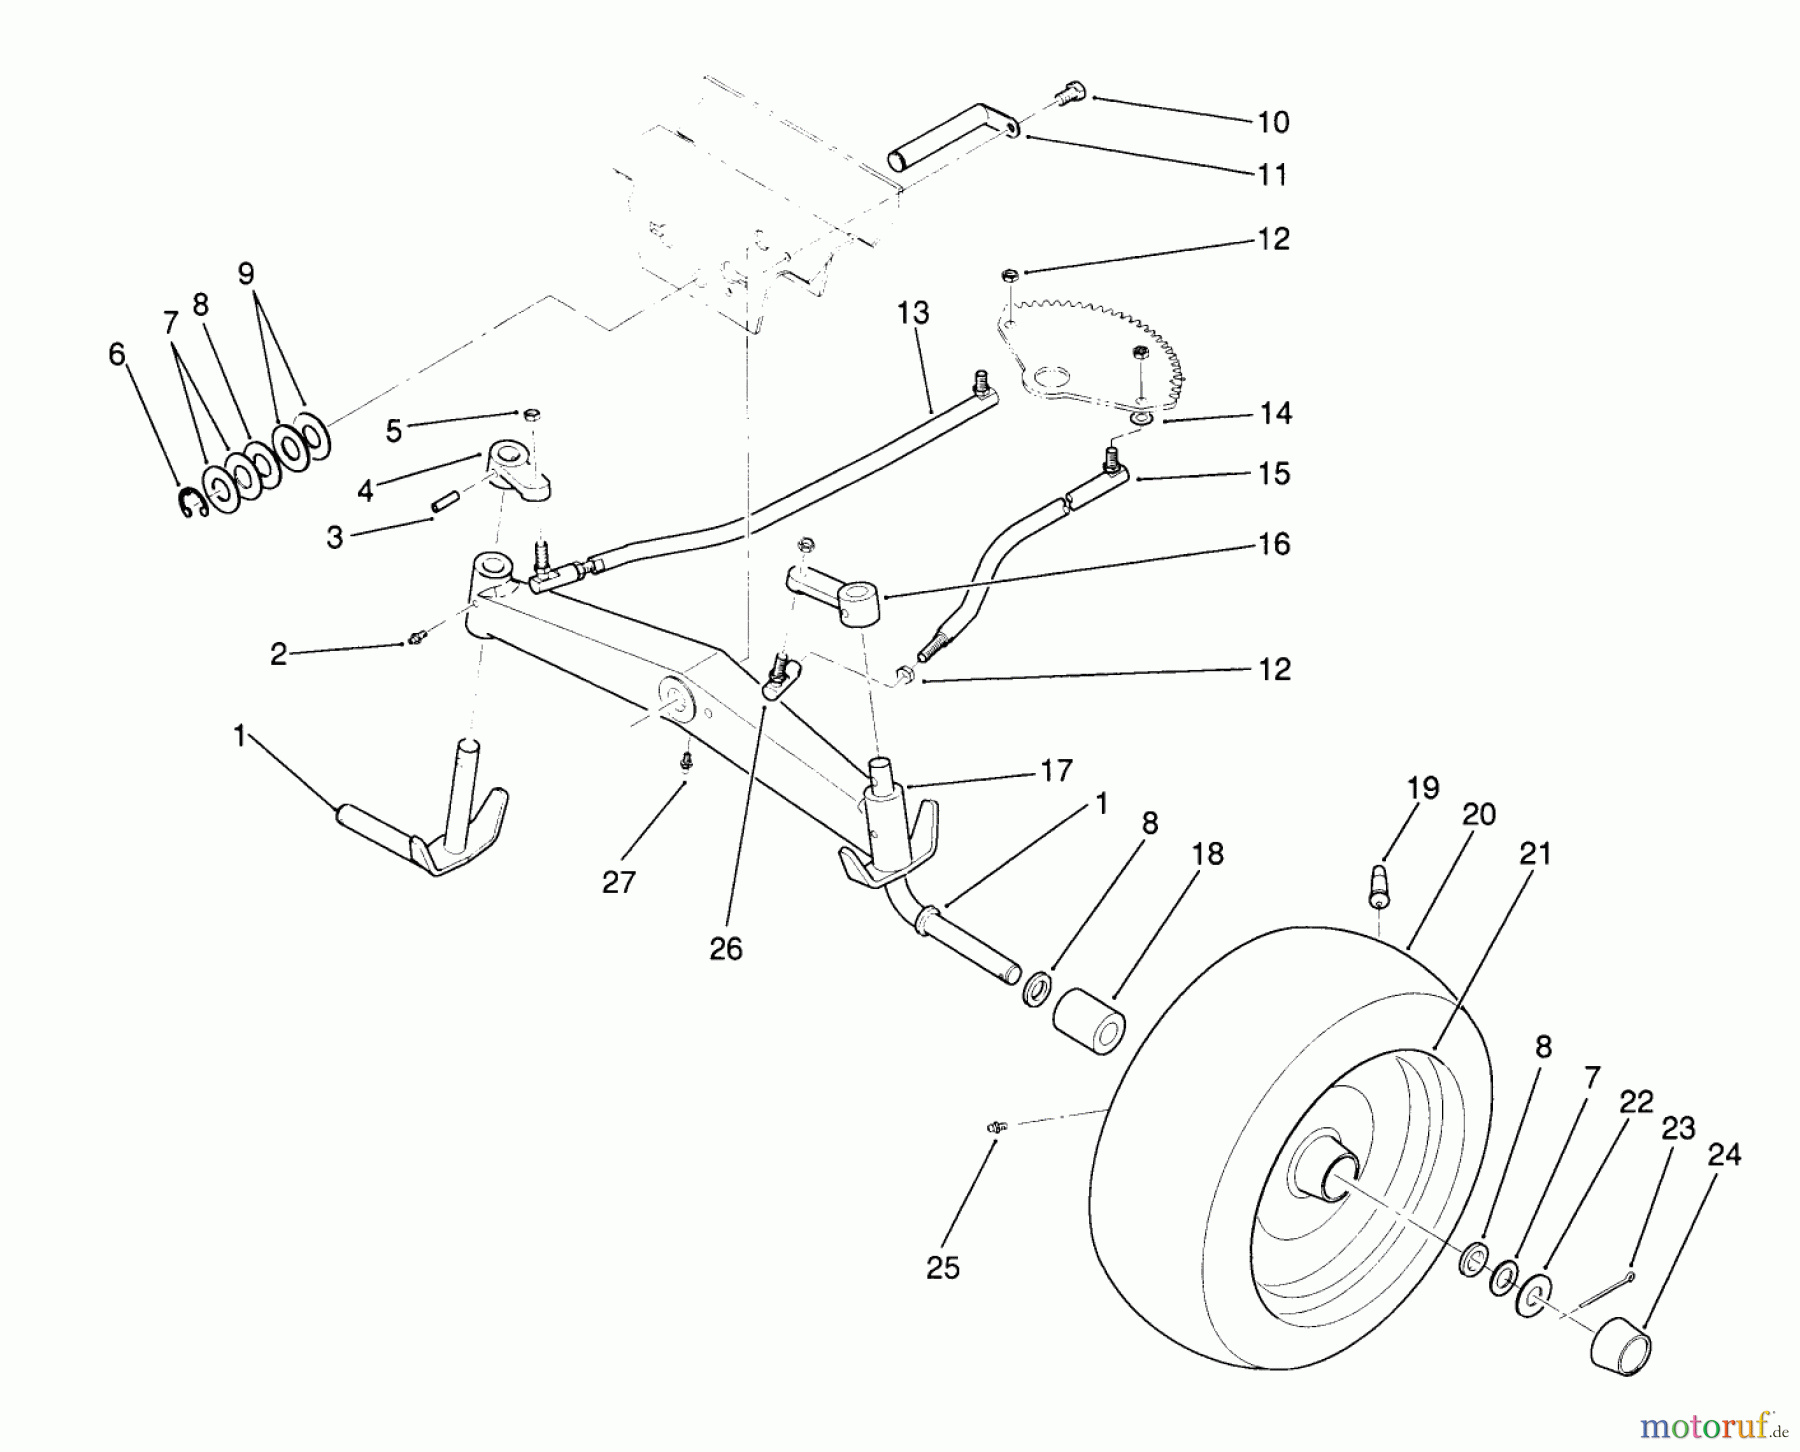  Toro Neu Mowers, Lawn & Garden Tractor Seite 1 22-14OE01 (244-H) - Toro 244-H Yard Tractor, 1991 (1000001-1999999) FRONT AXLE ASSEMBLY